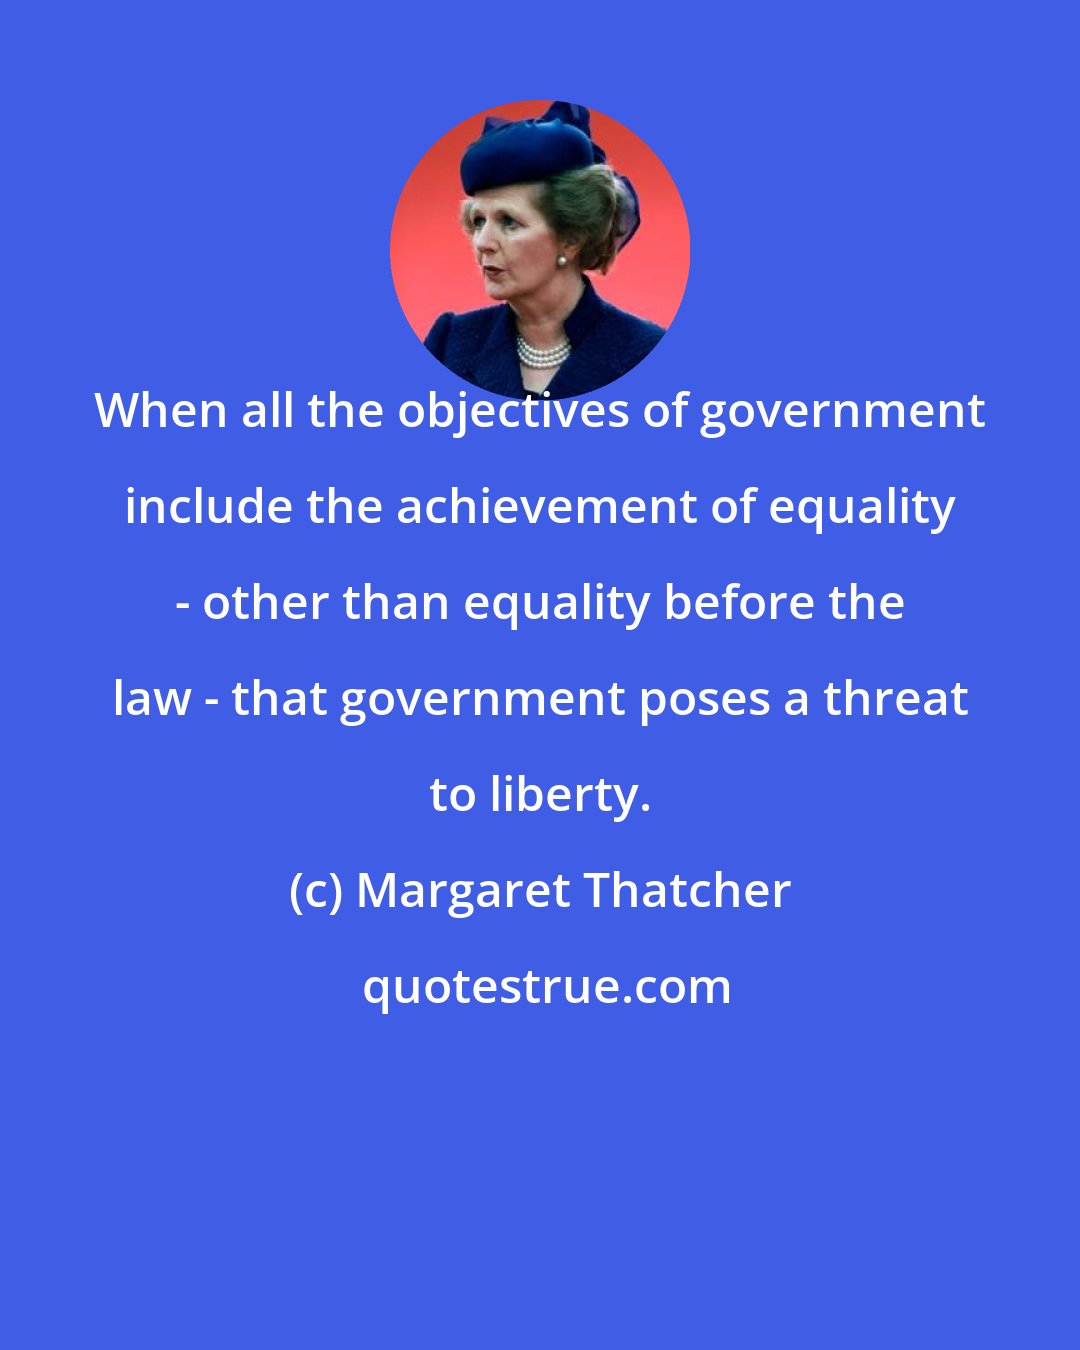 Margaret Thatcher: When all the objectives of government include the achievement of equality - other than equality before the law - that government poses a threat to liberty.